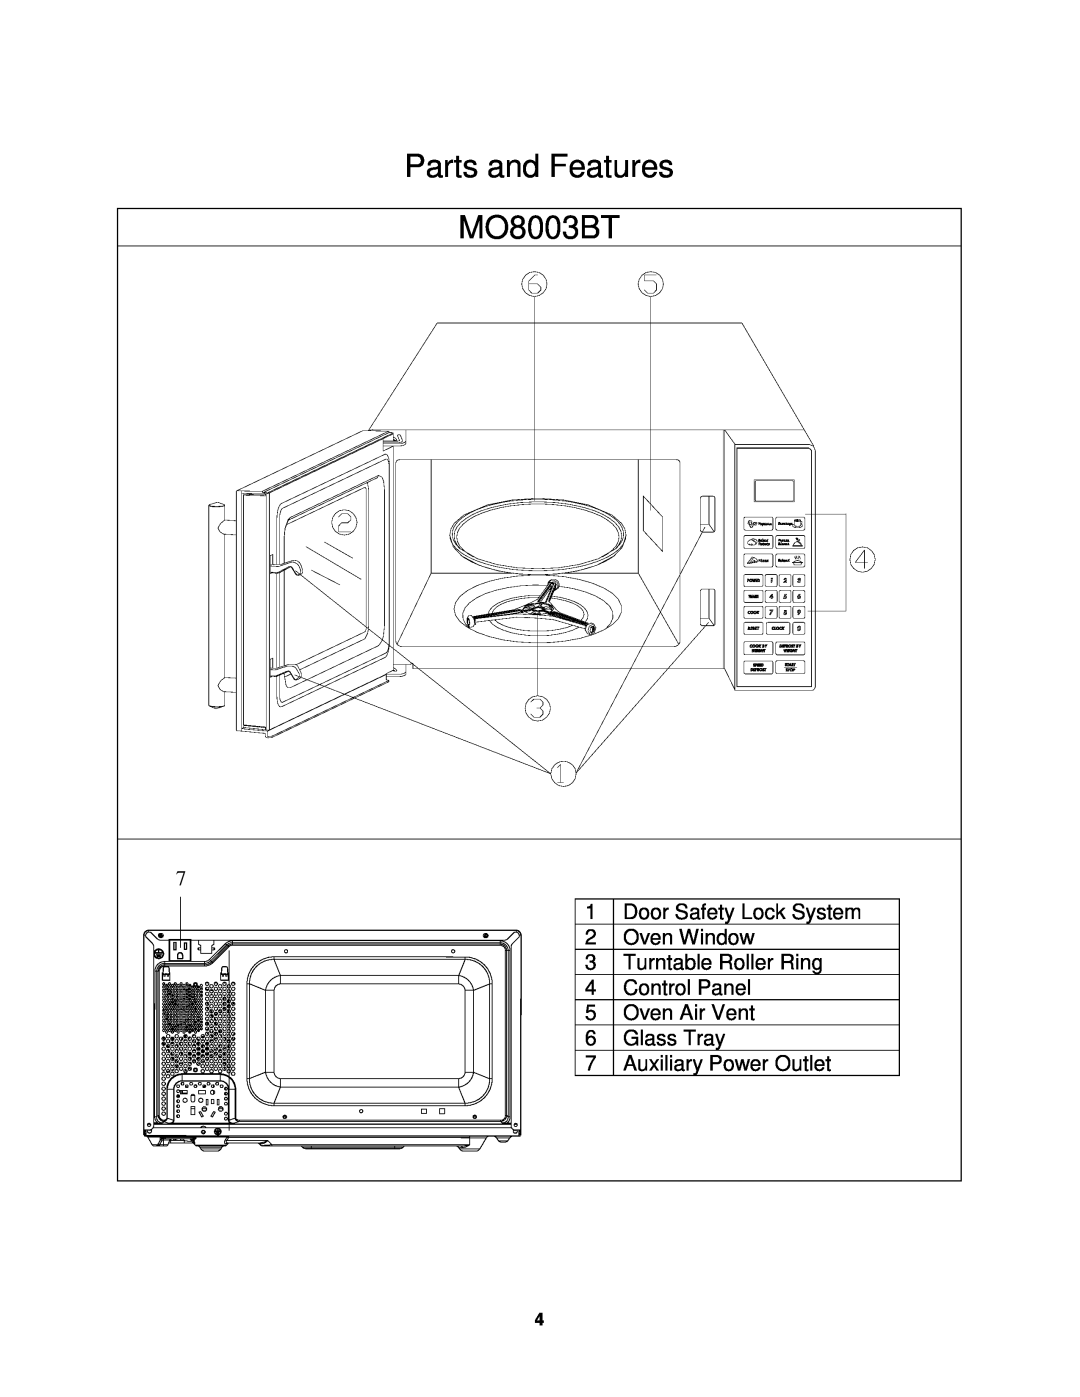 Avanti instruction manual Parts and Features MO8003BT 